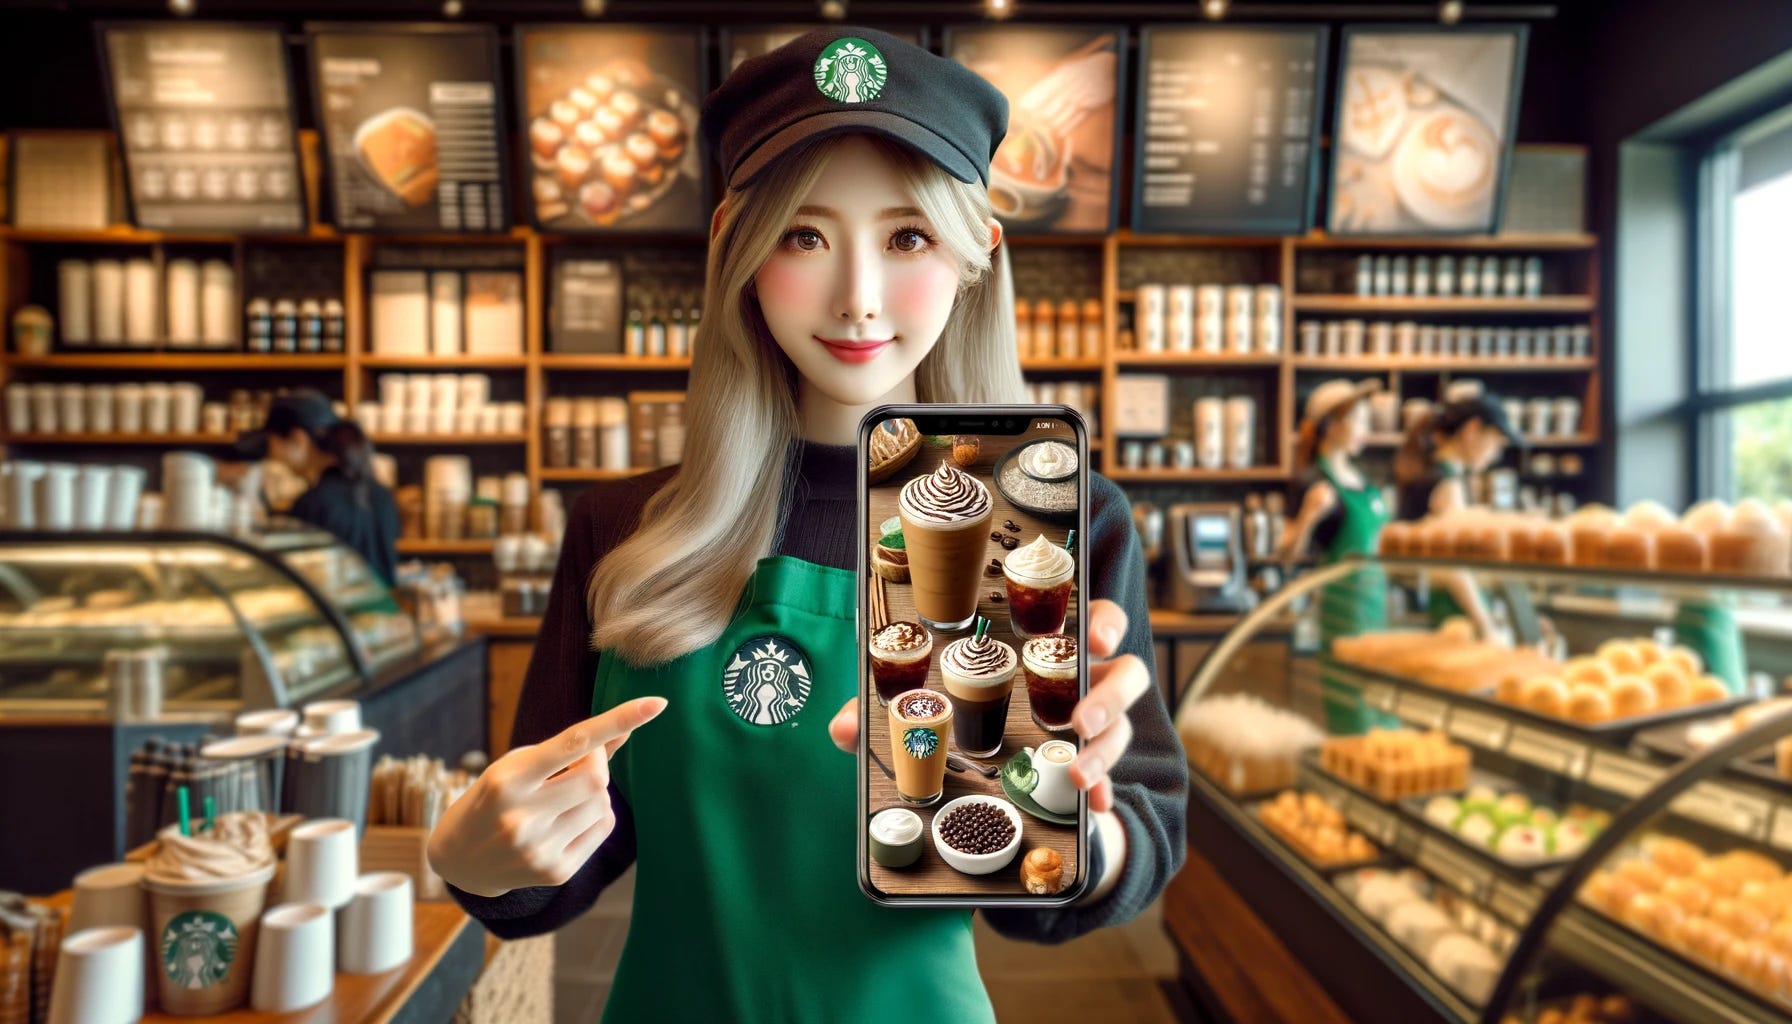 Create a landscape-oriented image depicting a Starbucks barista girl holding a cellphone, which displays images of Starbucks items and drinks. The barista is dressed in the recognizable Starbucks uniform, exuding a friendly and professional demeanor. The cellphone screen is clearly visible, showcasing a variety of Starbucks products, such as coffee cups, pastries, and other menu items, in vibrant and appealing detail. The background is a cozy Starbucks café interior, with customers enjoying their drinks and the warm, inviting atmosphere typical of Starbucks locations. This image captures the essence of the Starbucks experience, highlighting the connection between the staff, the products, and the customers in a modern and digital context.